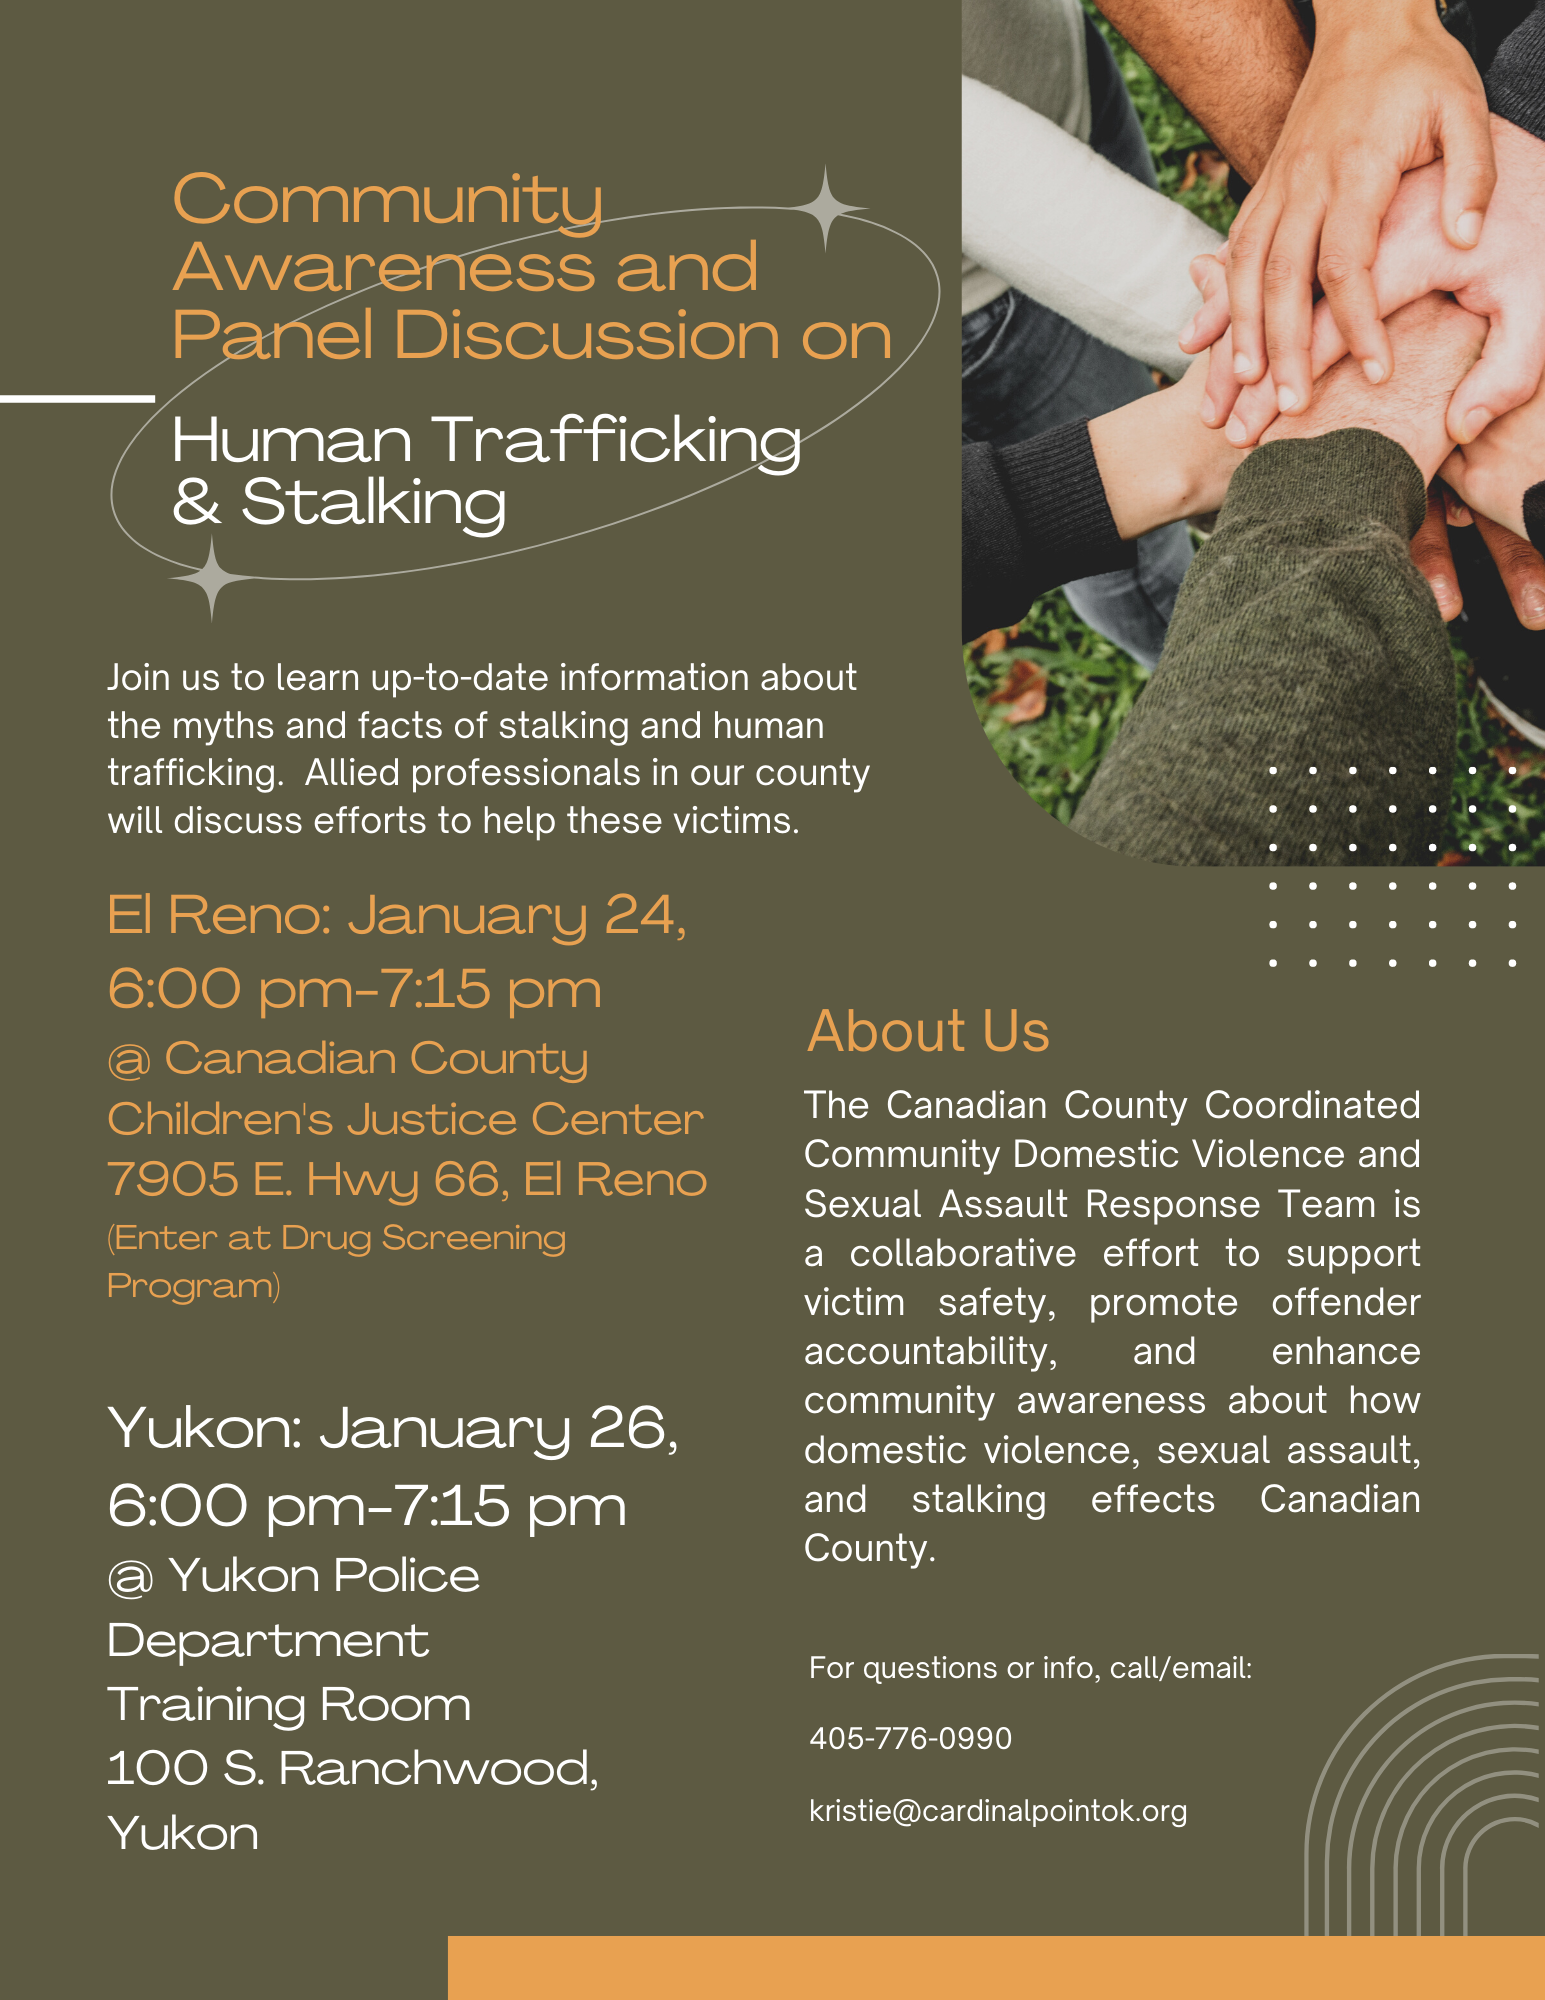 An infographic over a community event that will discuss "Human Trafficking and Stalking."